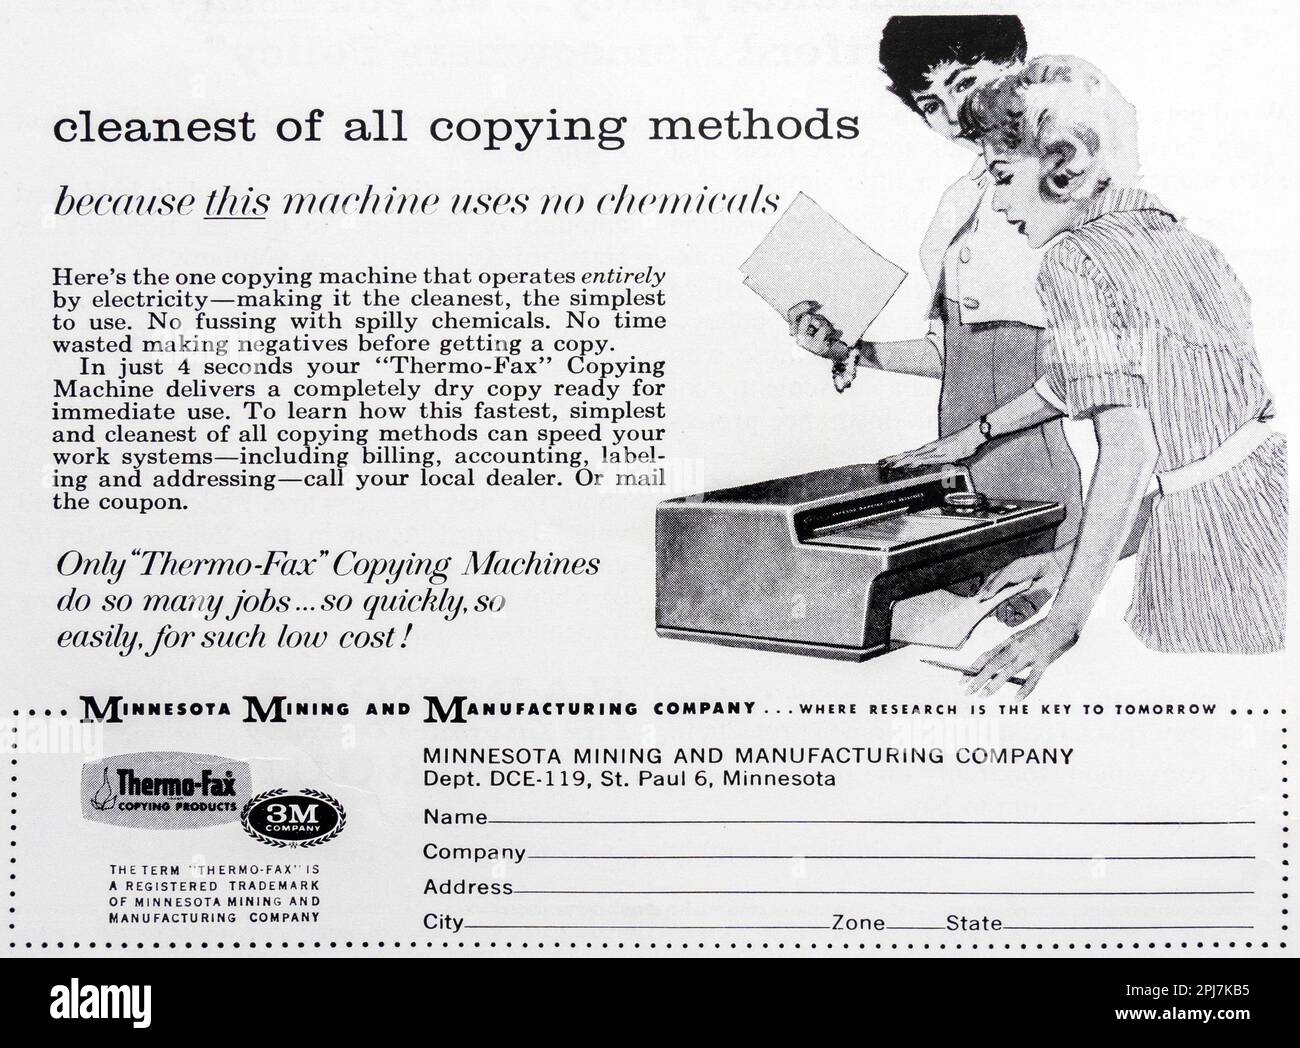 Thermo-fax copying products, 3M copiers,  advert in a Natgeo magazine, November 1959 Stock Photo